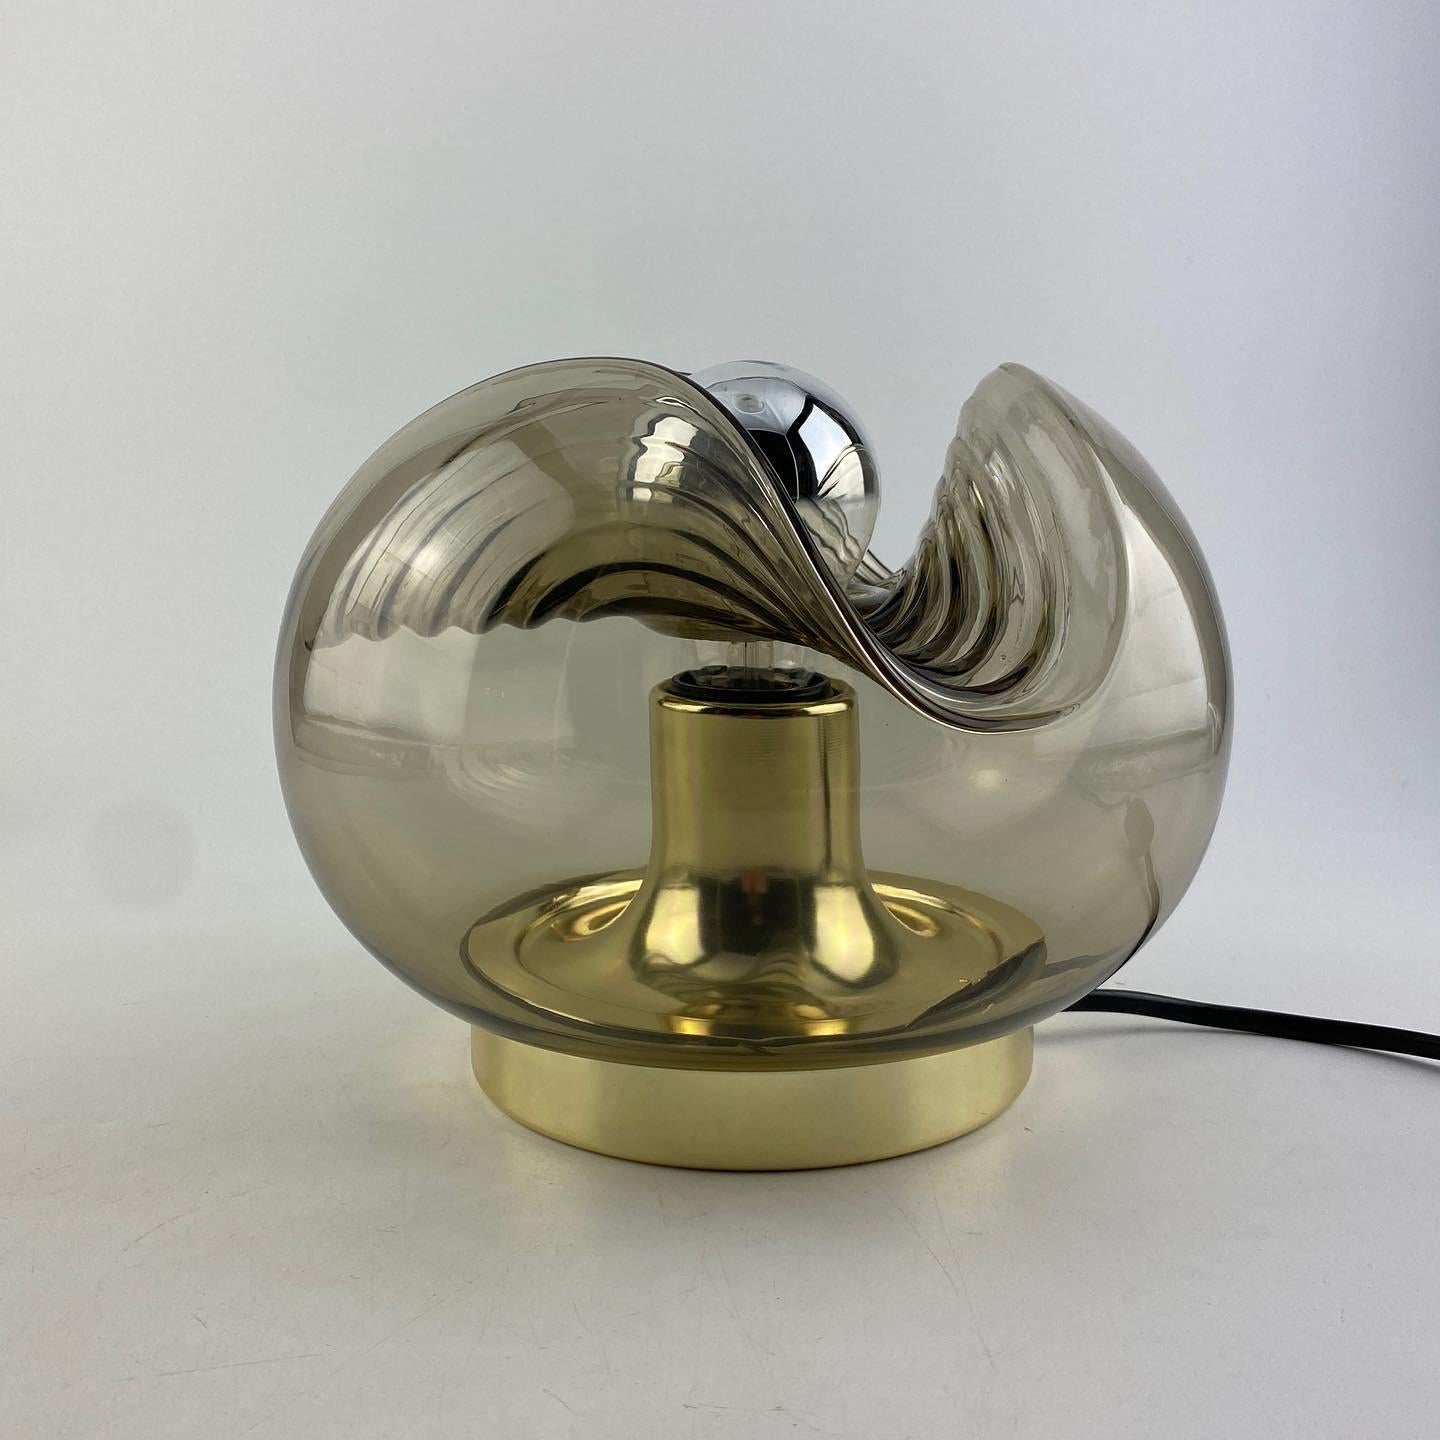 Beautiful German table light manufactured by Peill and Putzler produced around 1970. Amazing wave shaped smoked glass globe and gold chromed parts. This combination in a table lamp does not show up very often, pretty uncommon.

Has been rewarded